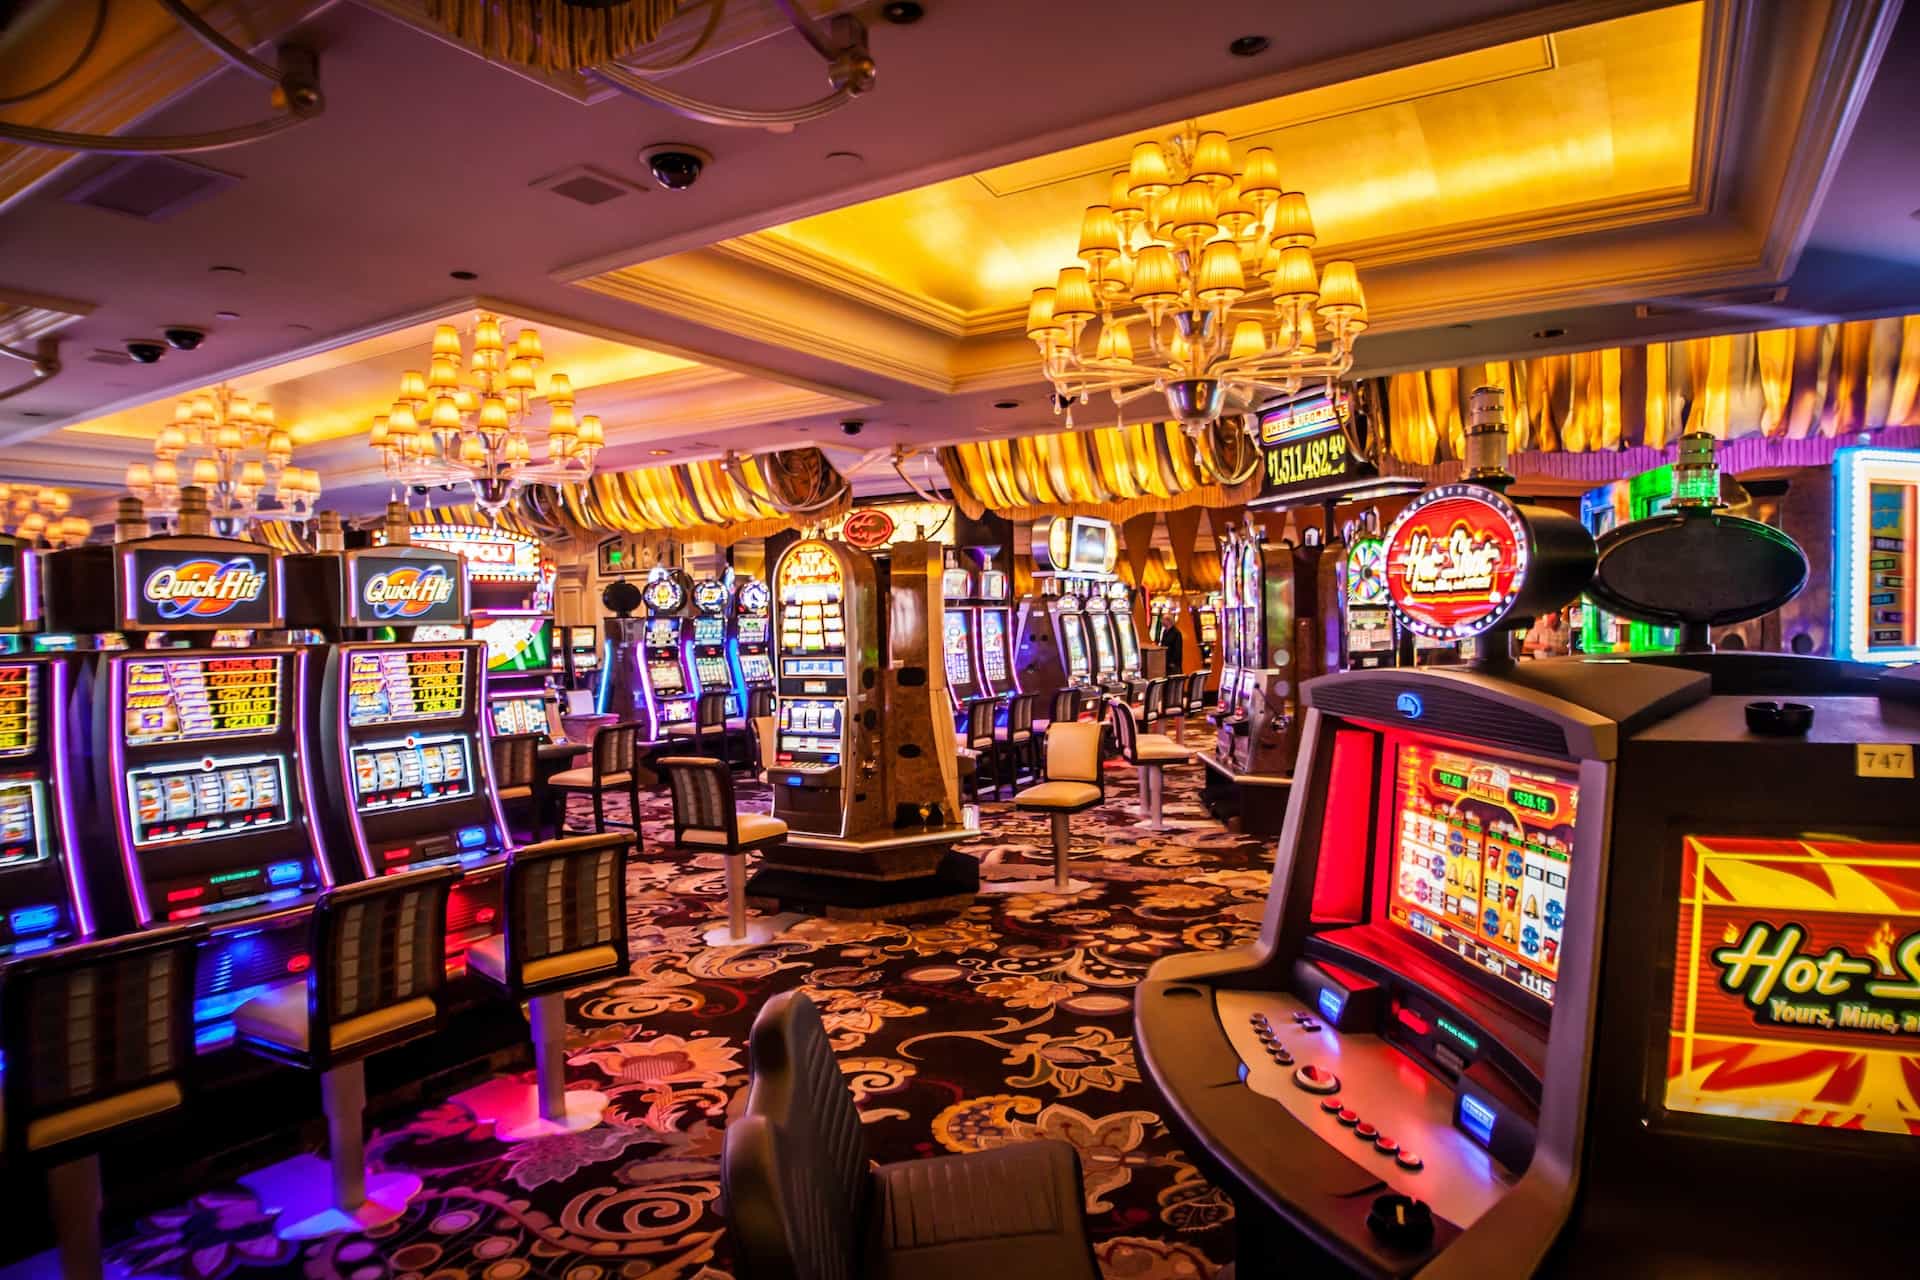 The inside of a casino floor, filled with various types of slot machines, video slot machines, and other gaming offerings.